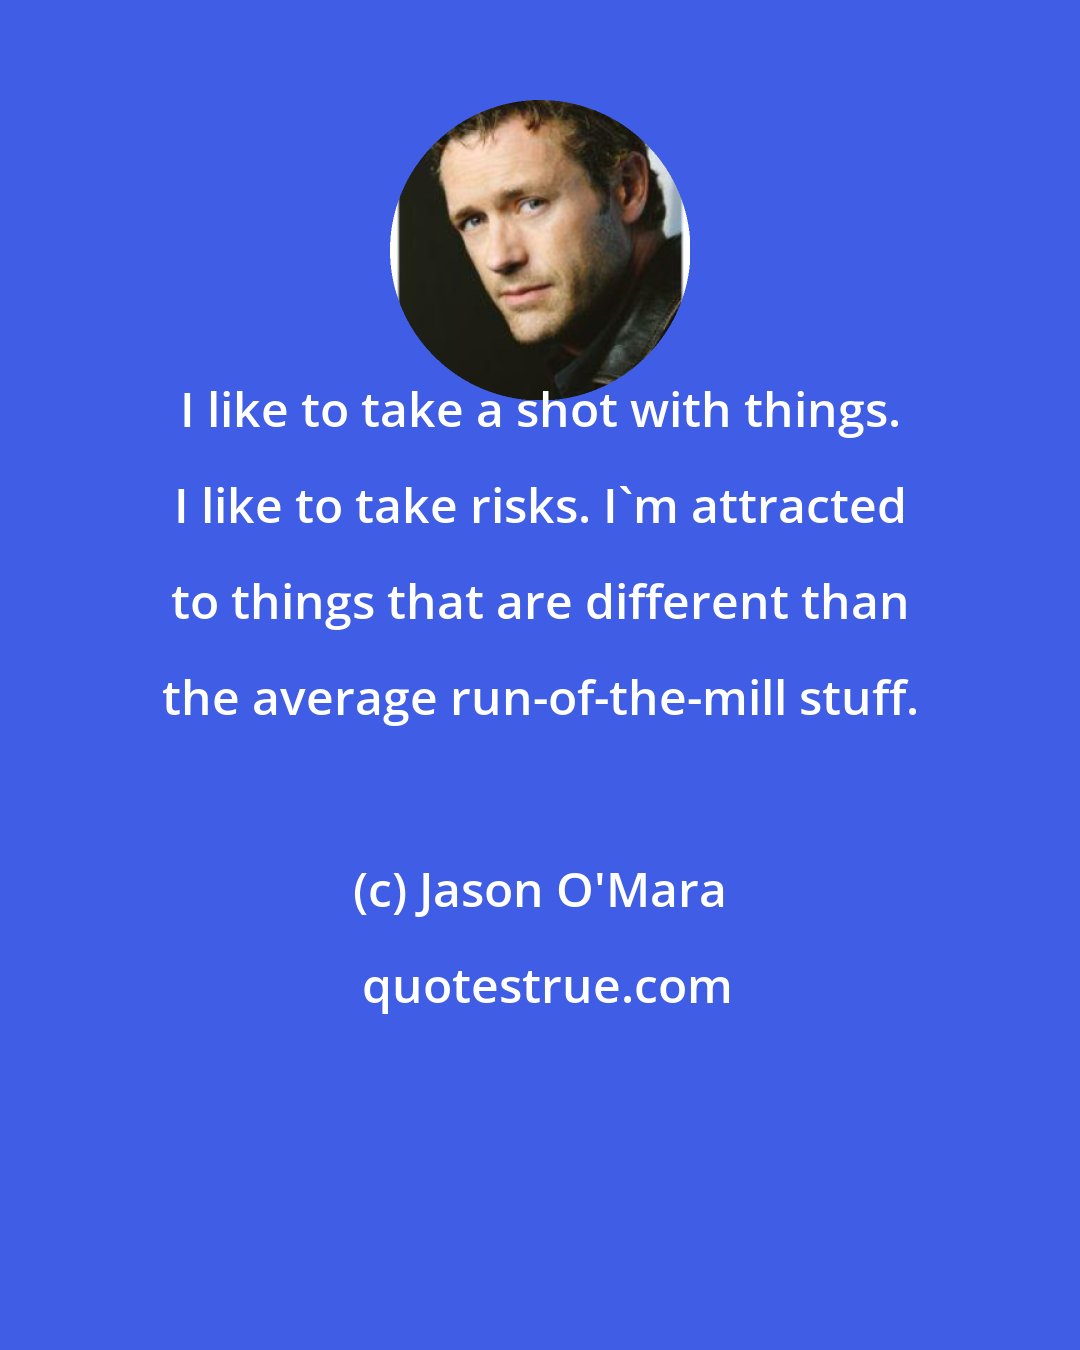 Jason O'Mara: I like to take a shot with things. I like to take risks. I'm attracted to things that are different than the average run-of-the-mill stuff.